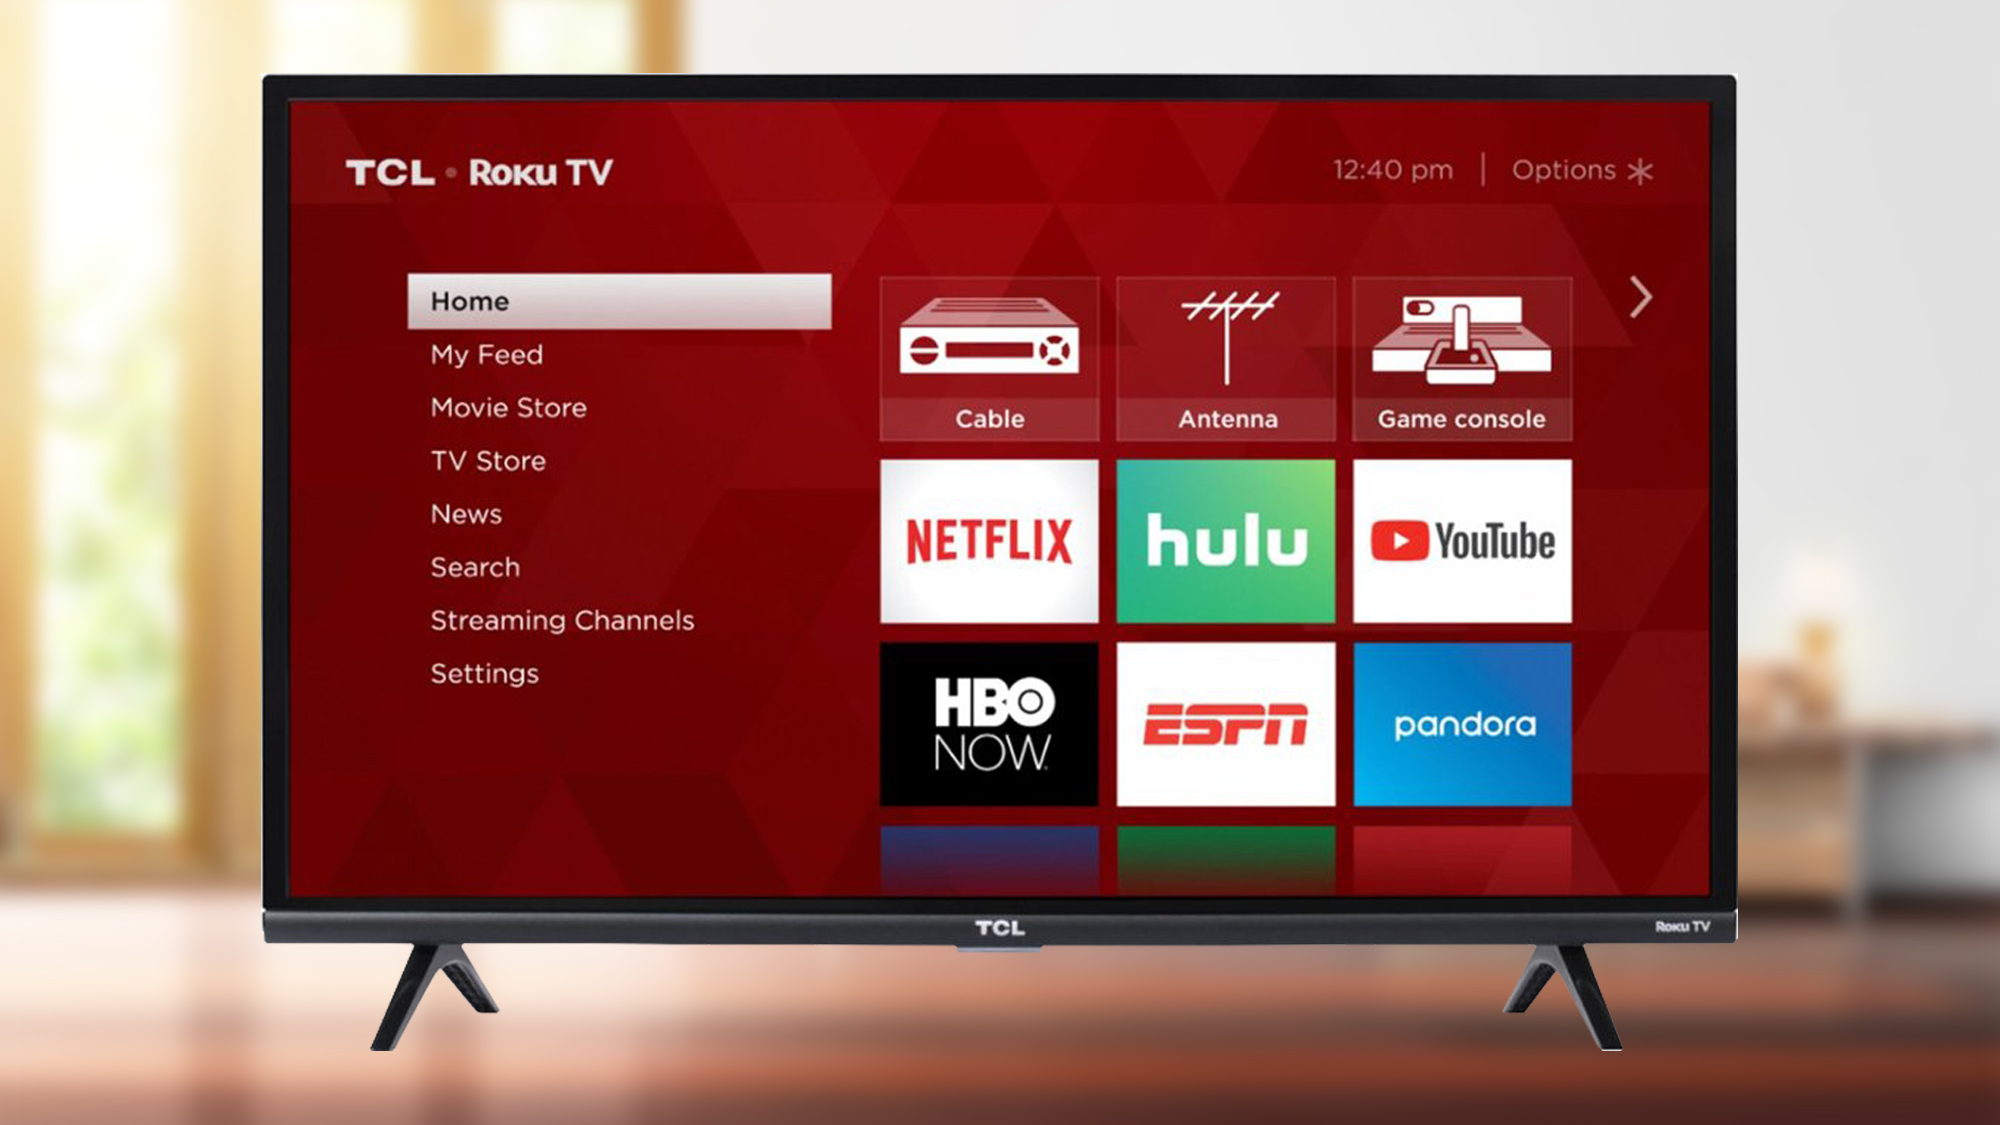 The best gaming TV in full HD: the TCL 3 Series Roku TV on blurred background.